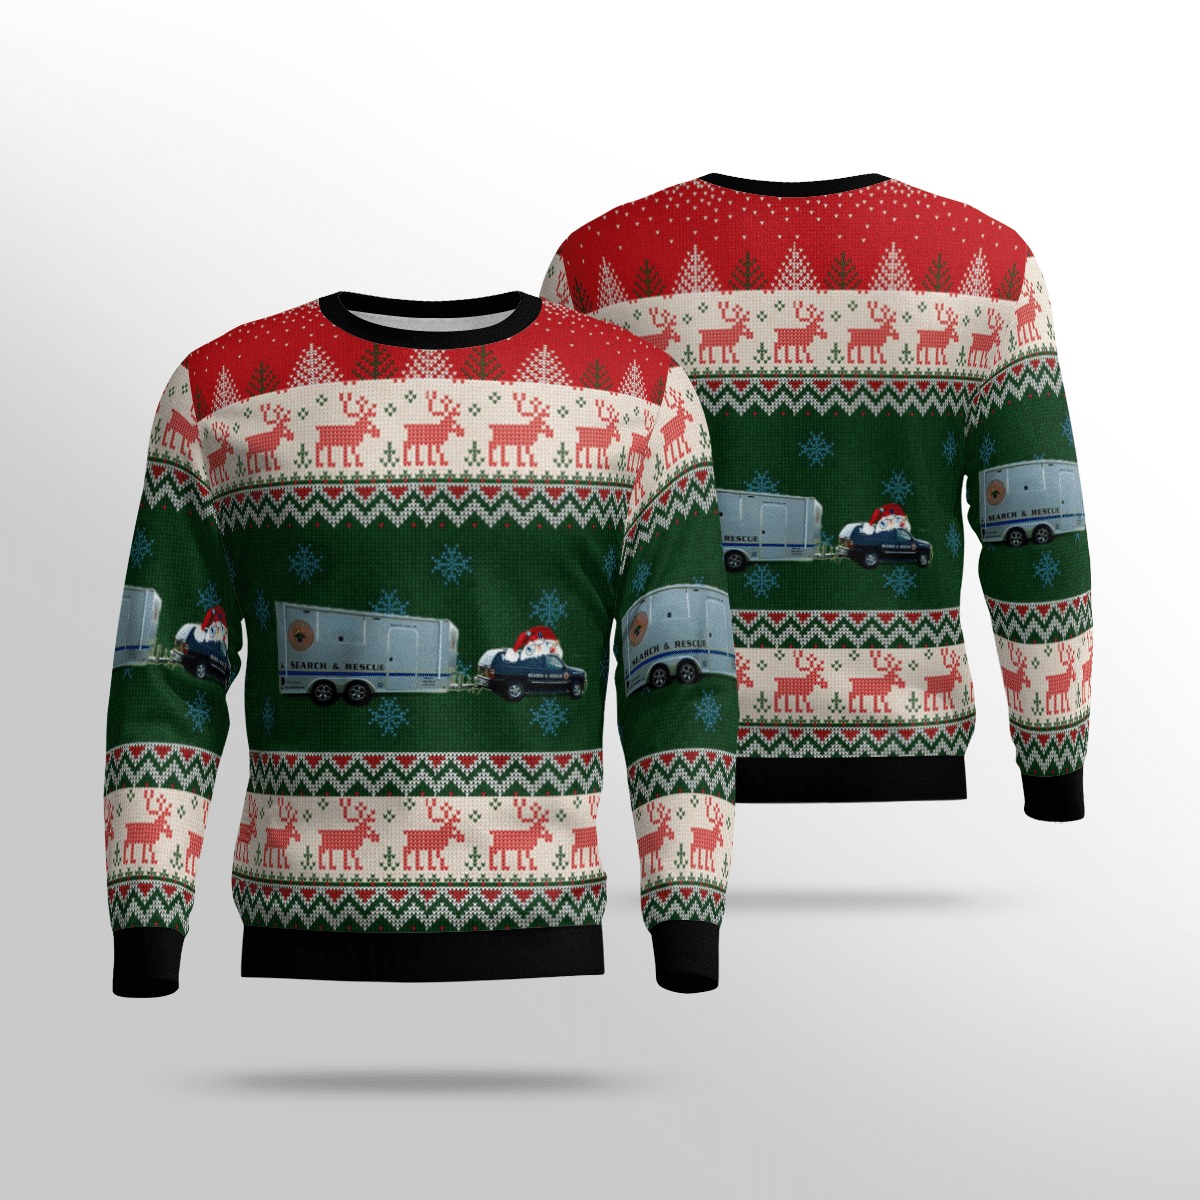 TOP HOT SWEATER AND SWEATSHIRT FOR CHRISTMAS 2021